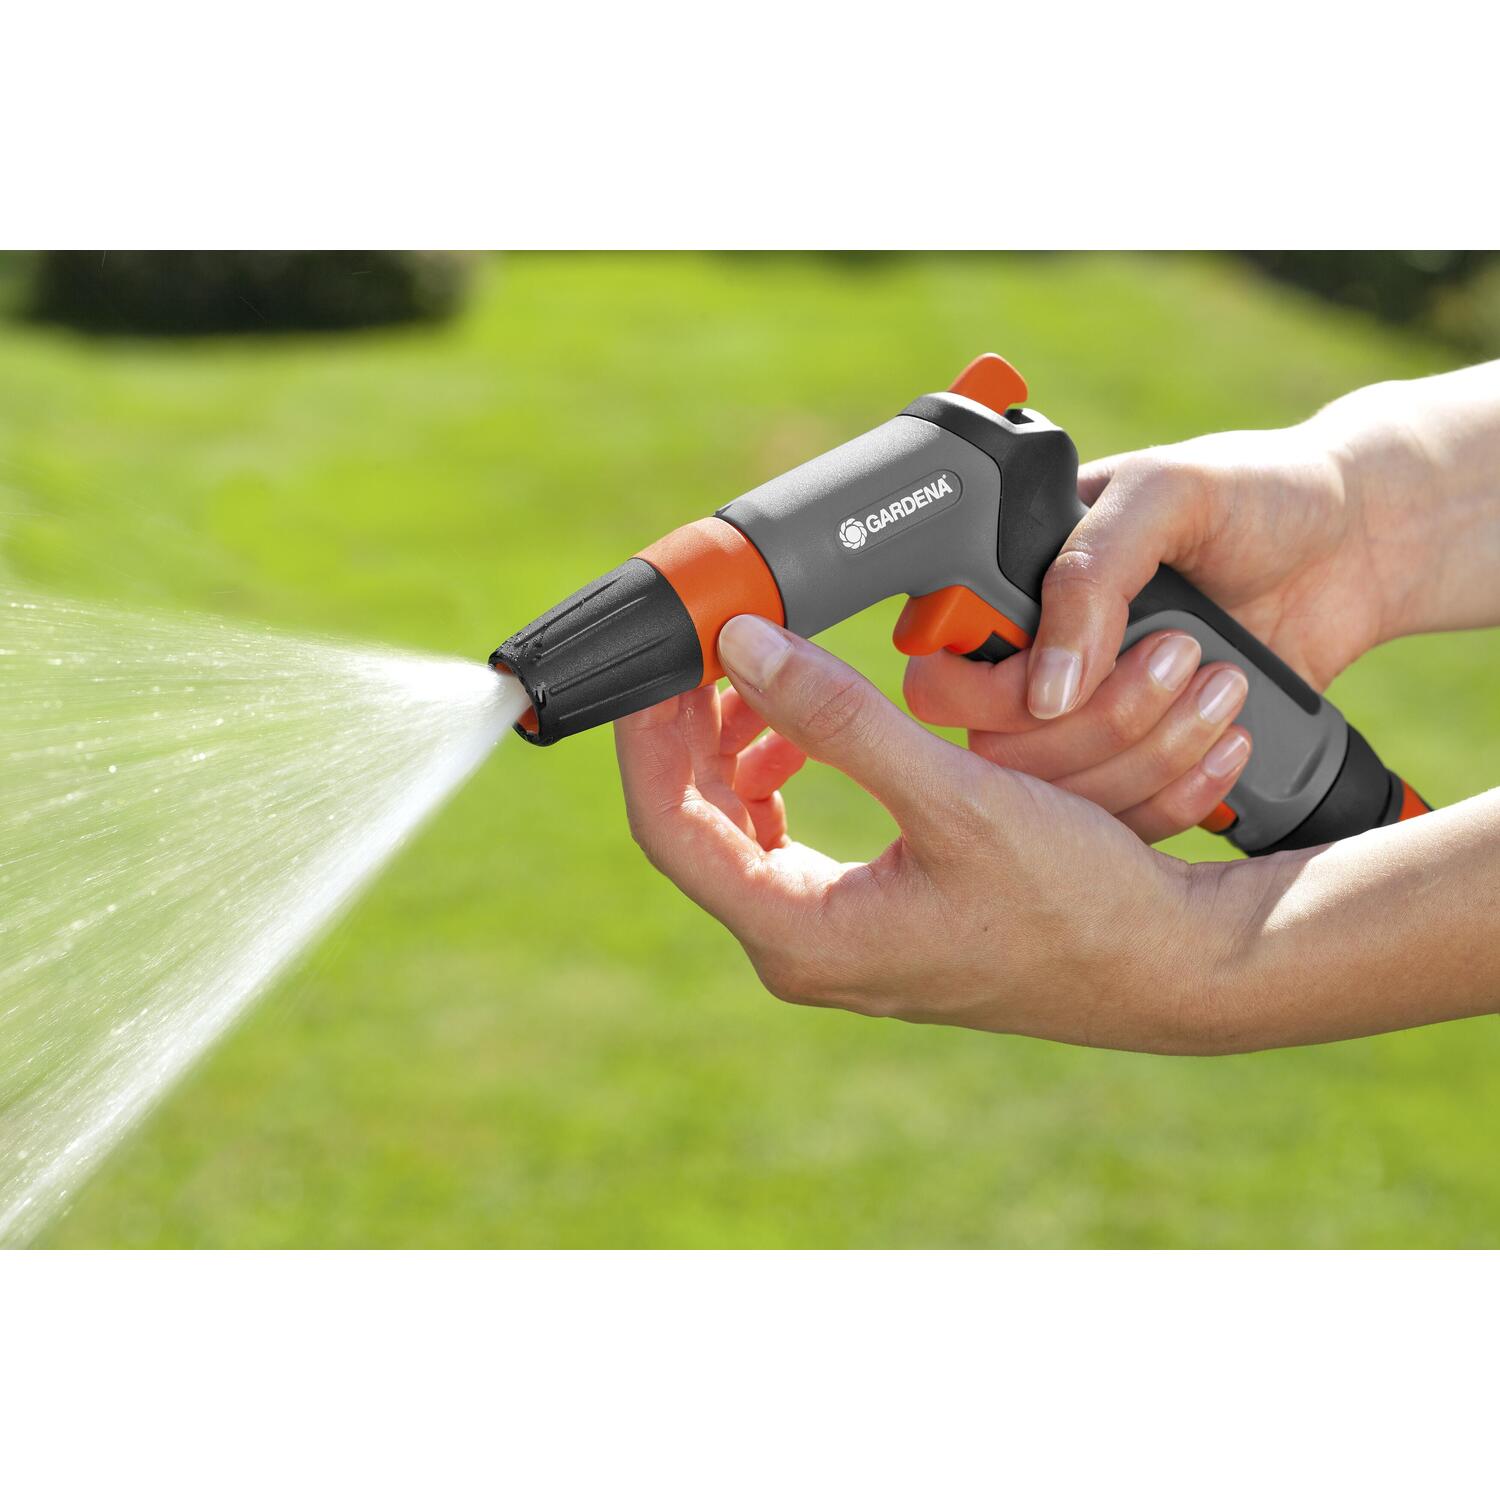 Gardena Classic Cleaning Nozzle Image 2